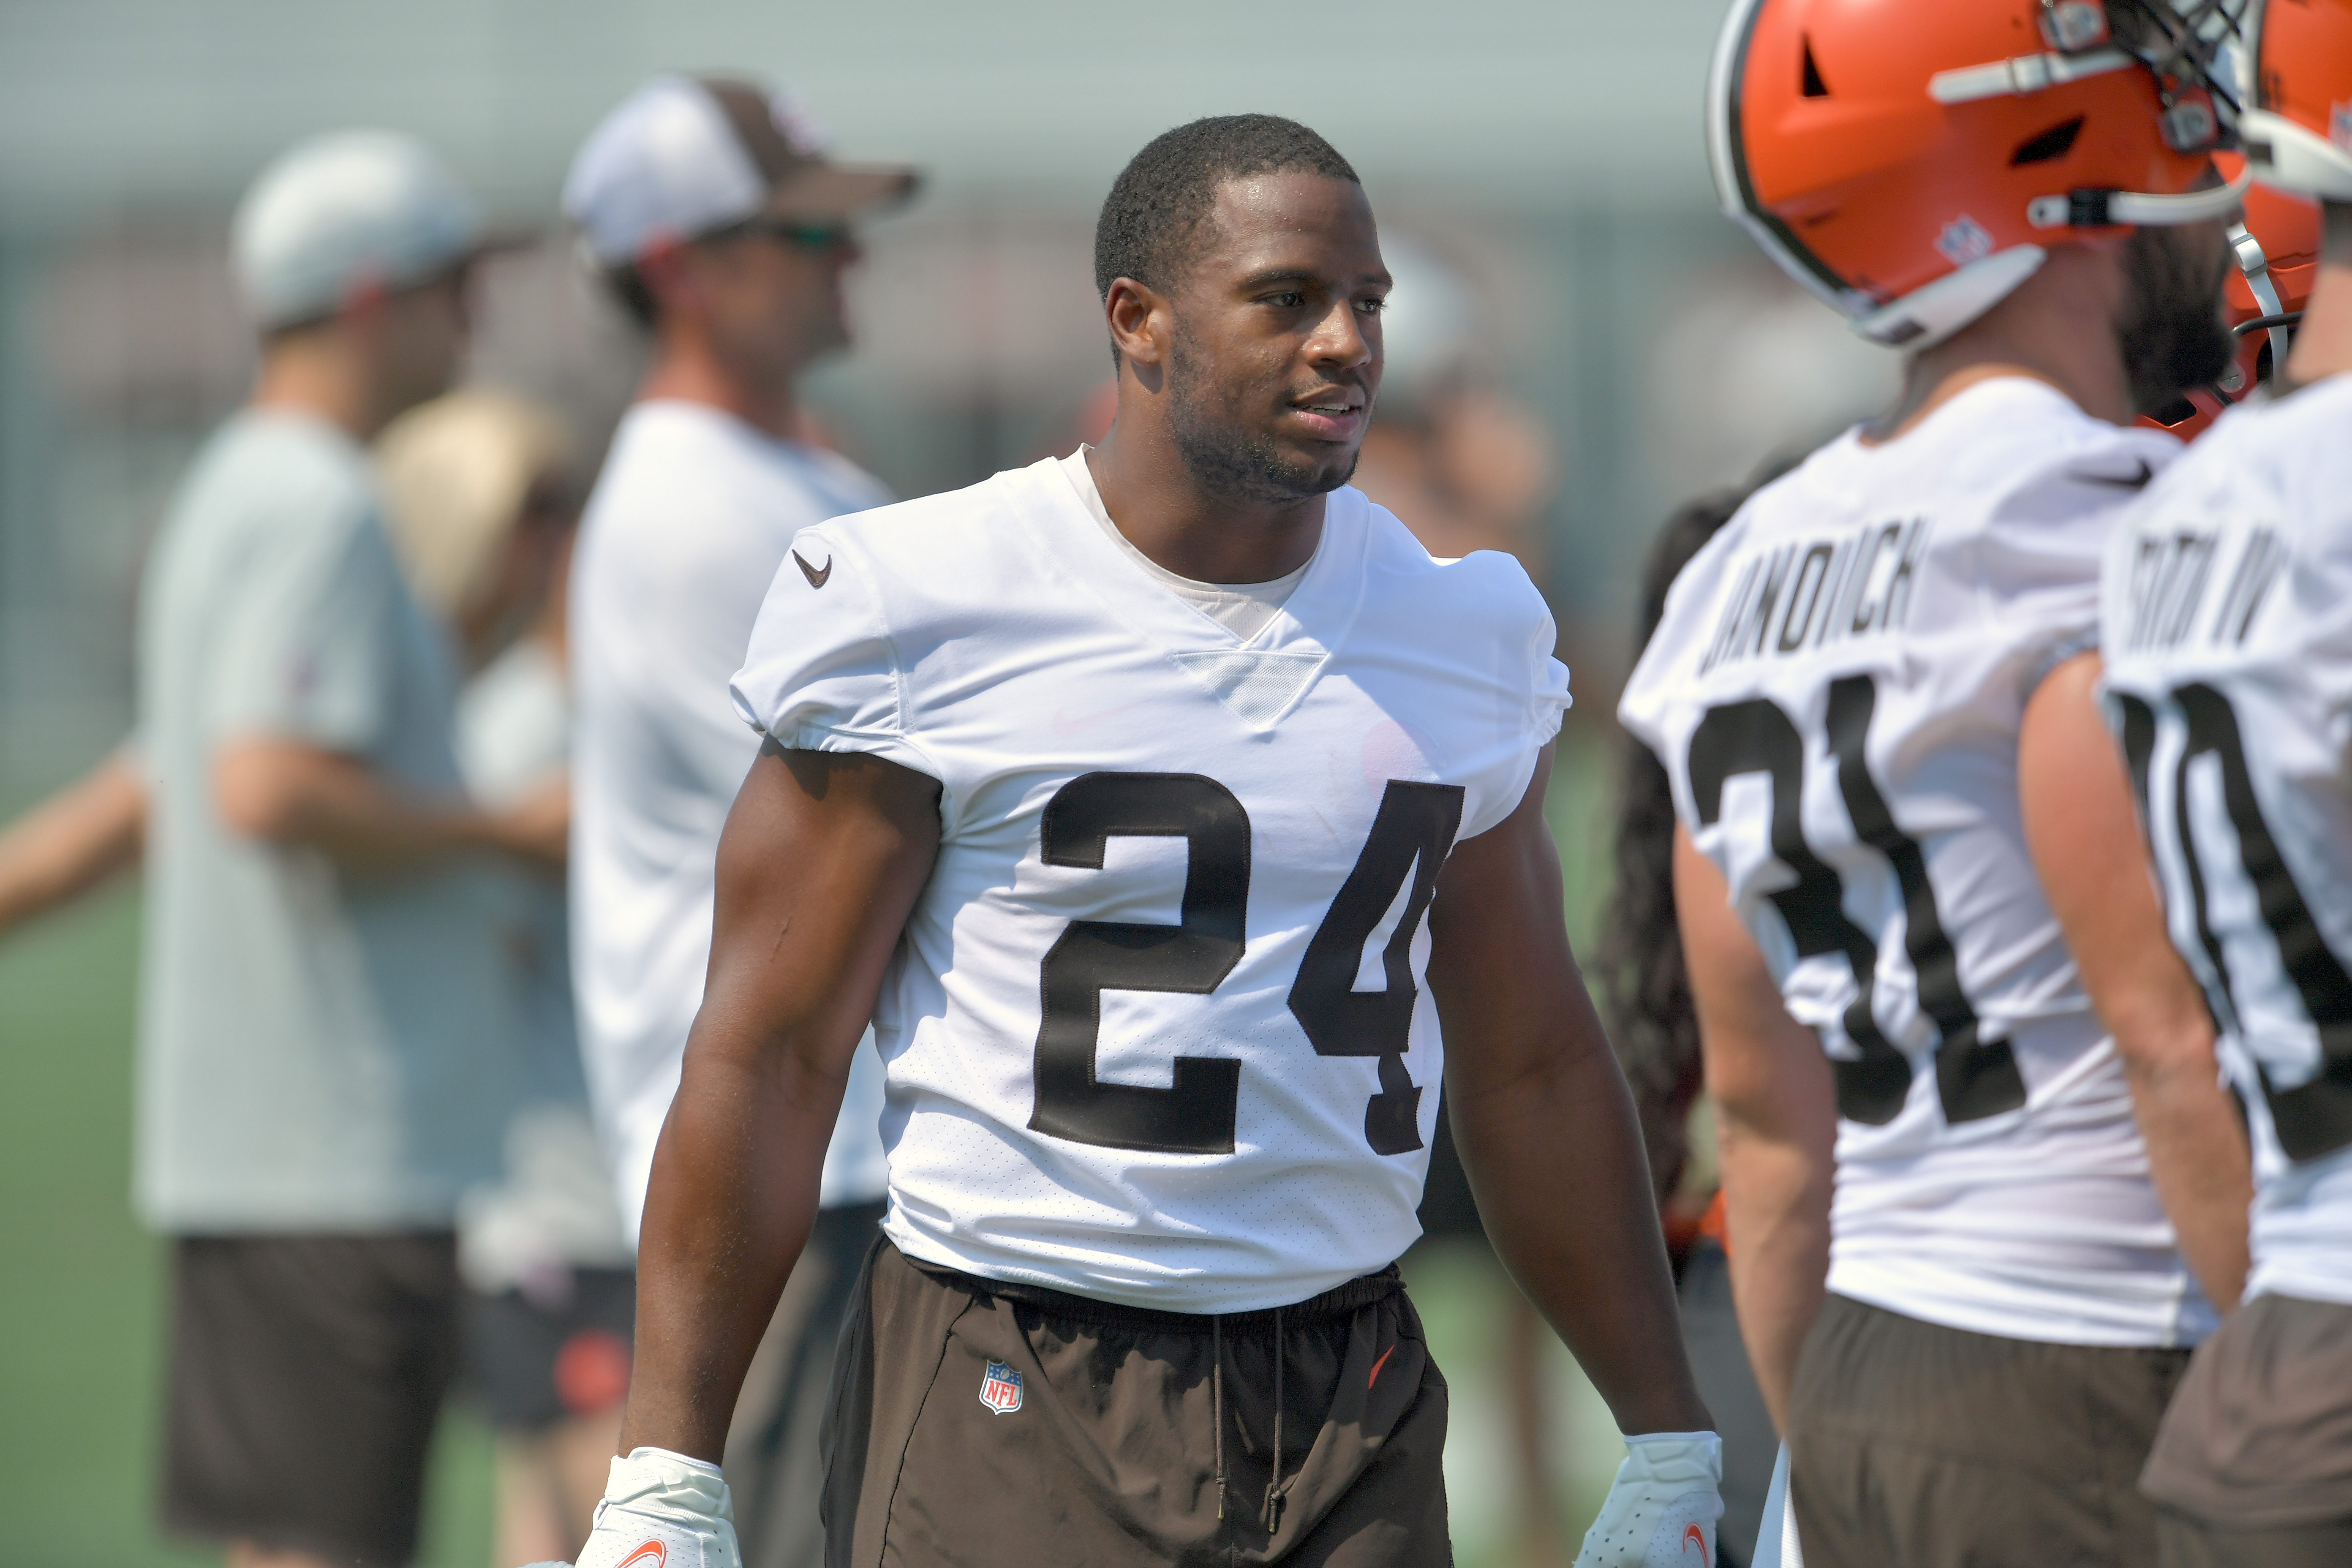 Cleveland Browns running back Nick Chubb warms up during training camp